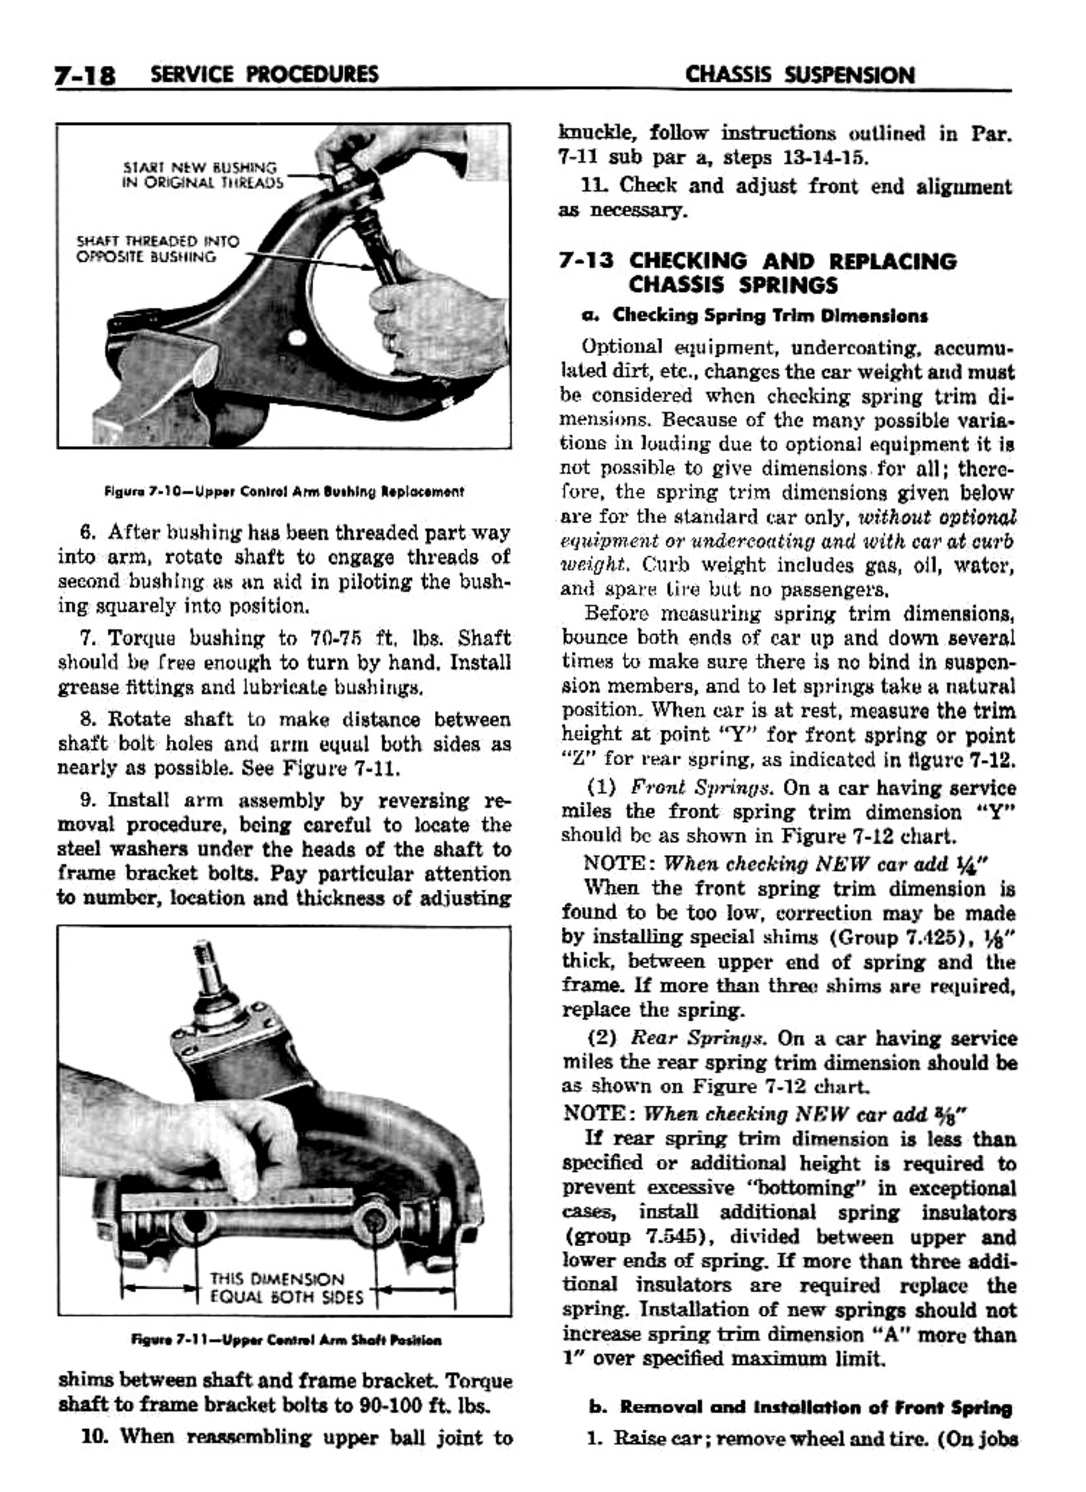 n_08 1959 Buick Shop Manual - Chassis Suspension-018-018.jpg